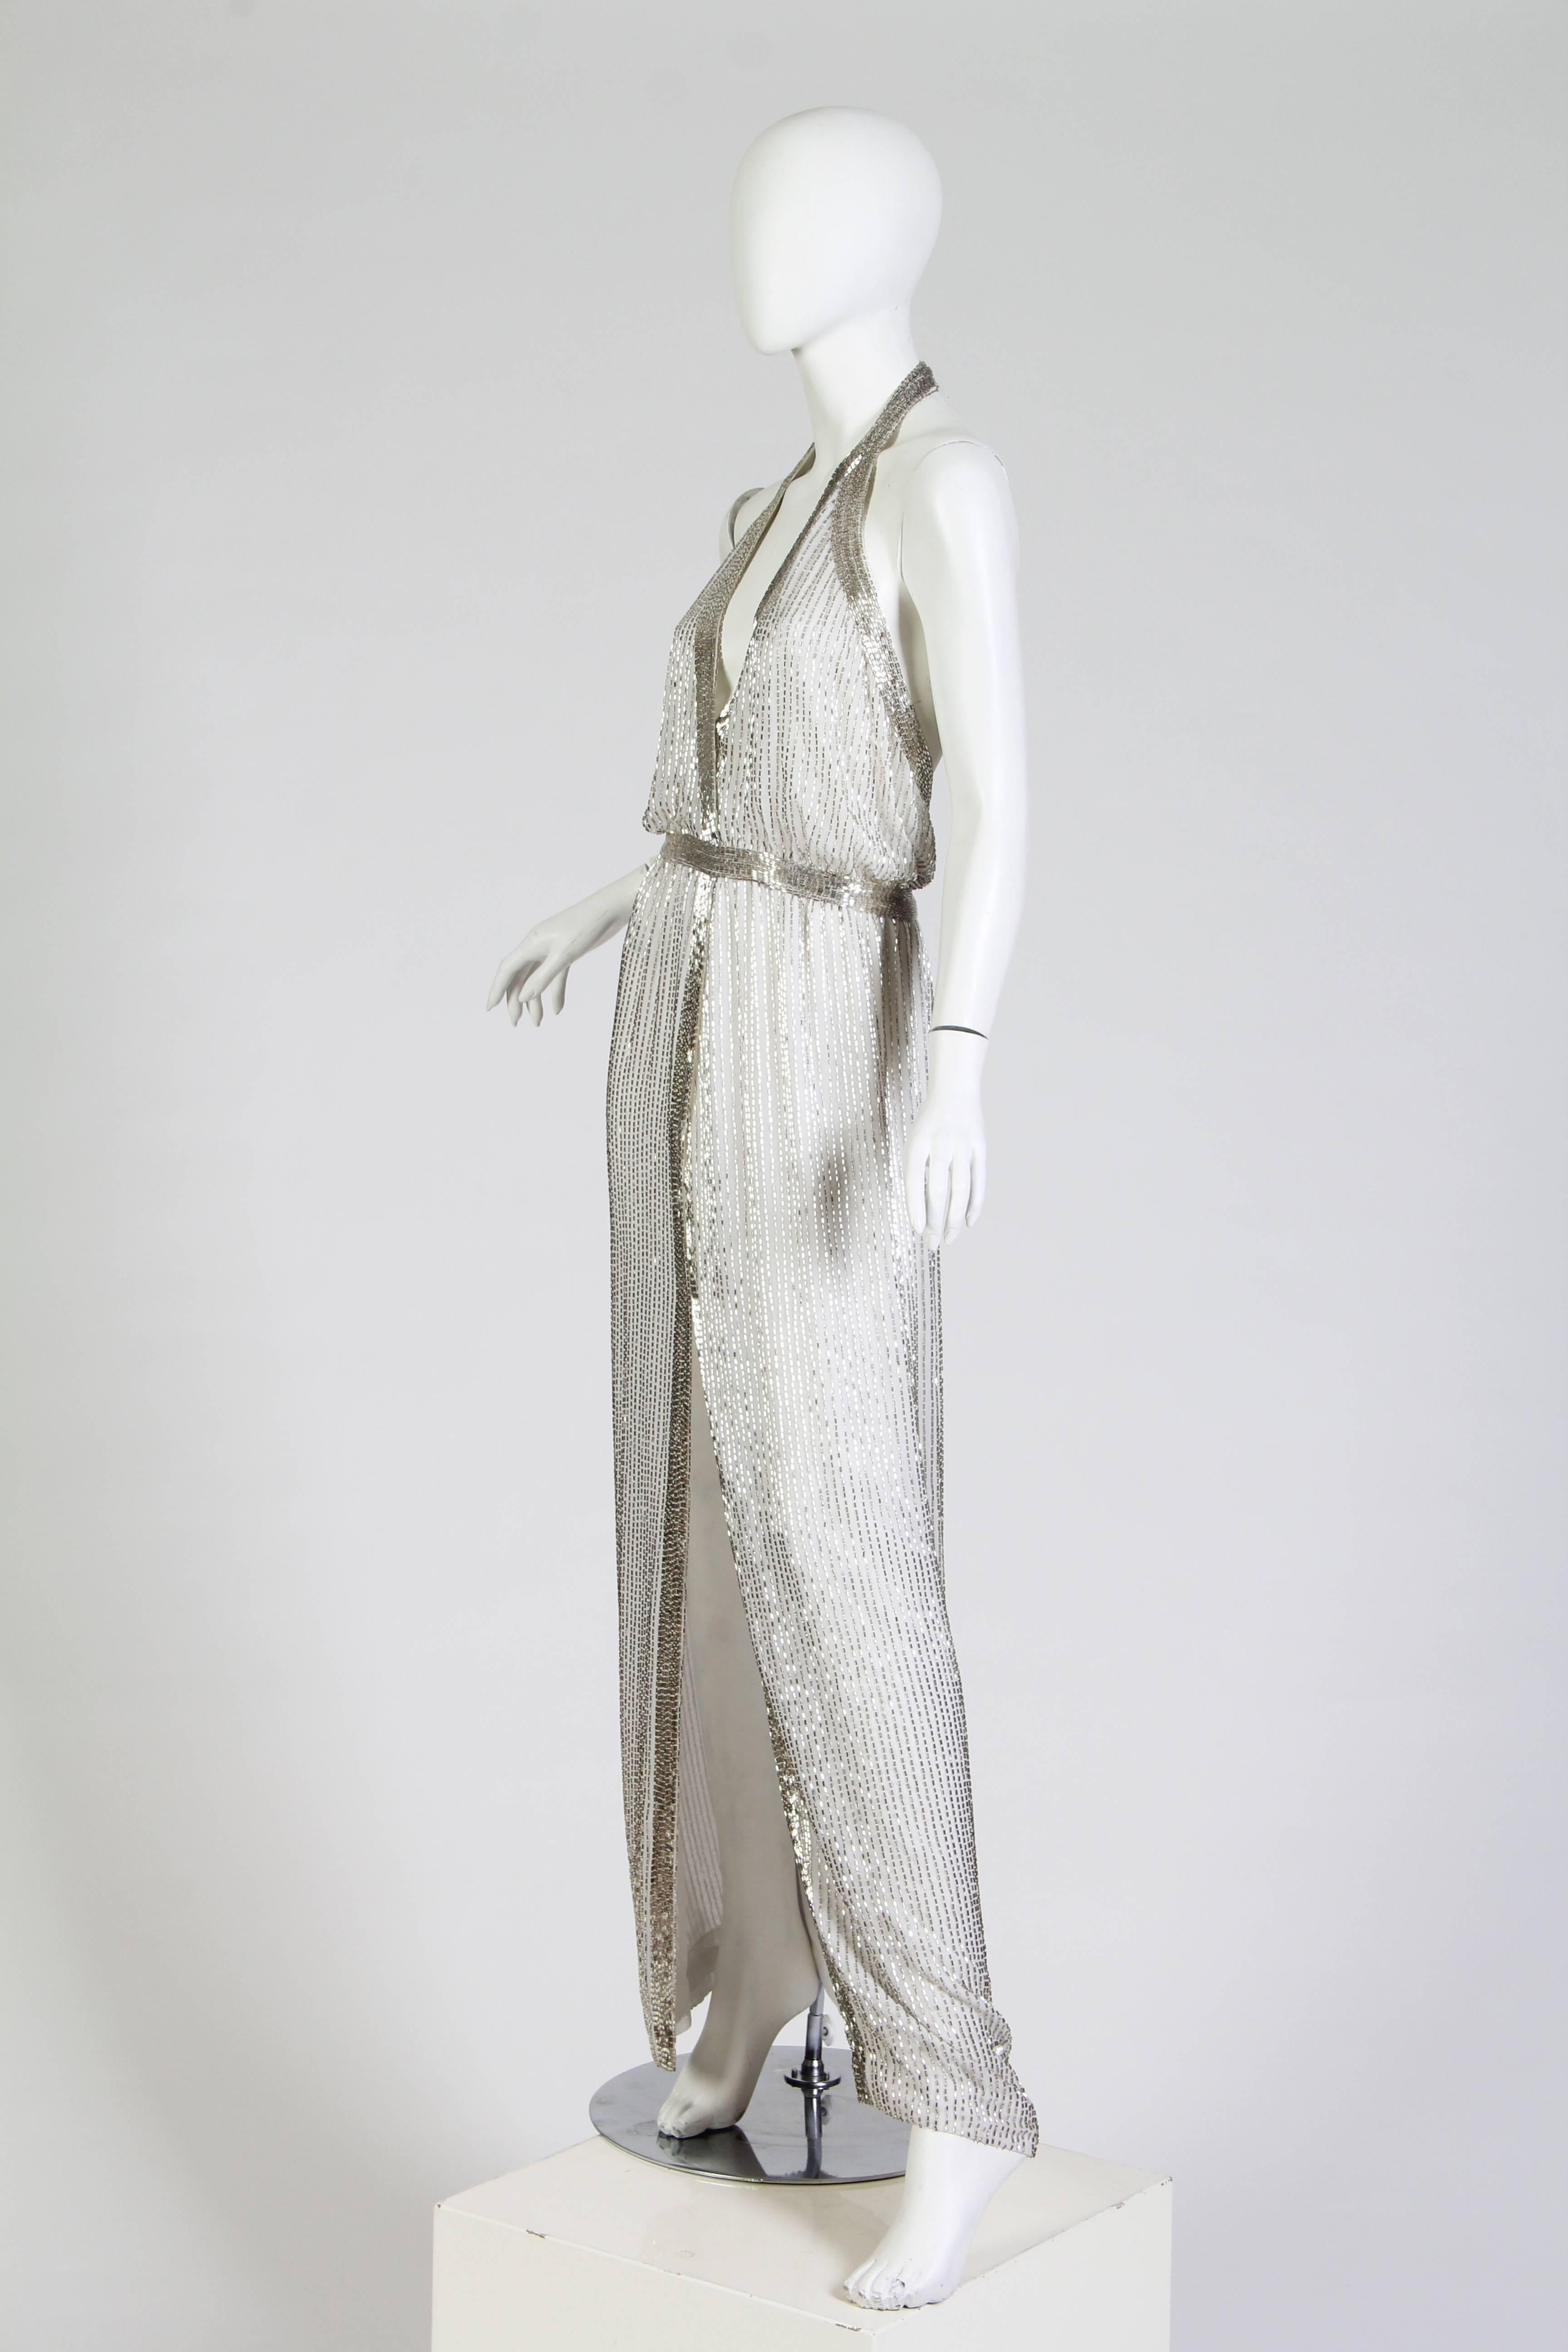 Backless 1970s Heavily Beaded Gown with Plunging V and High Slit very Halston but no label. 